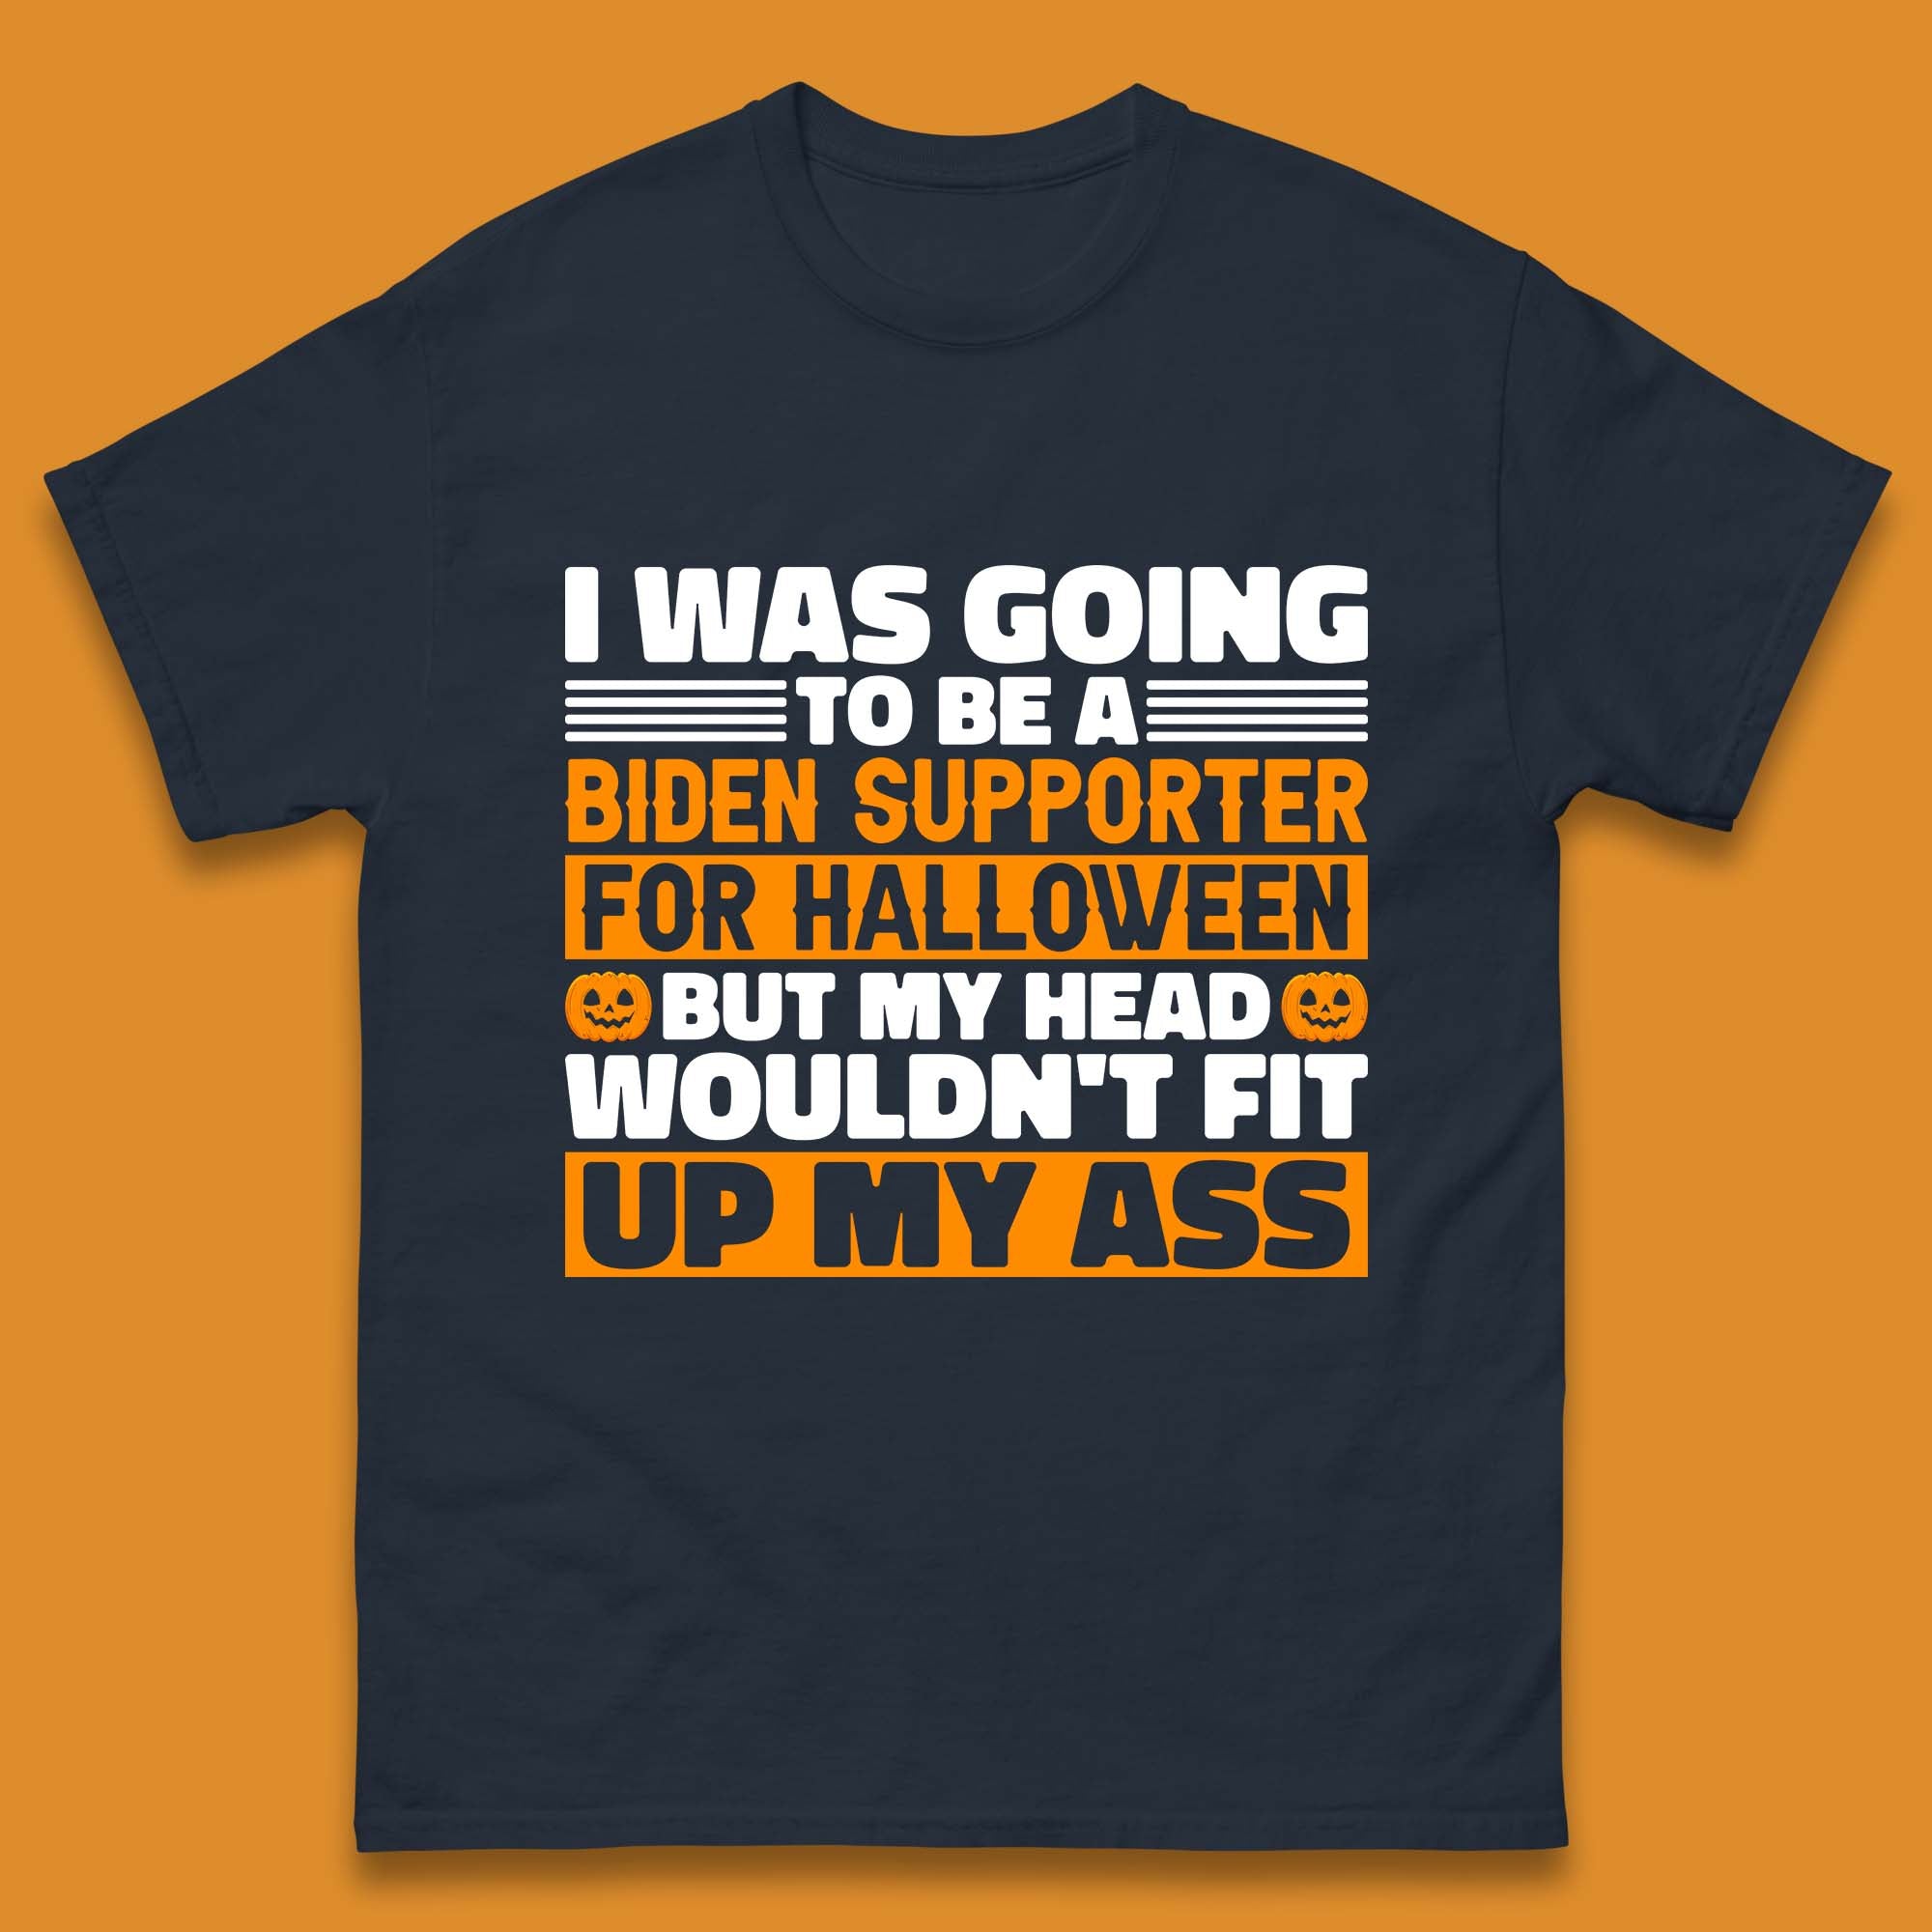 I Was Going To Be A Biden Supporter For Halloween But My Head Wouldn't Fit Up My Ass Mens Tee Top